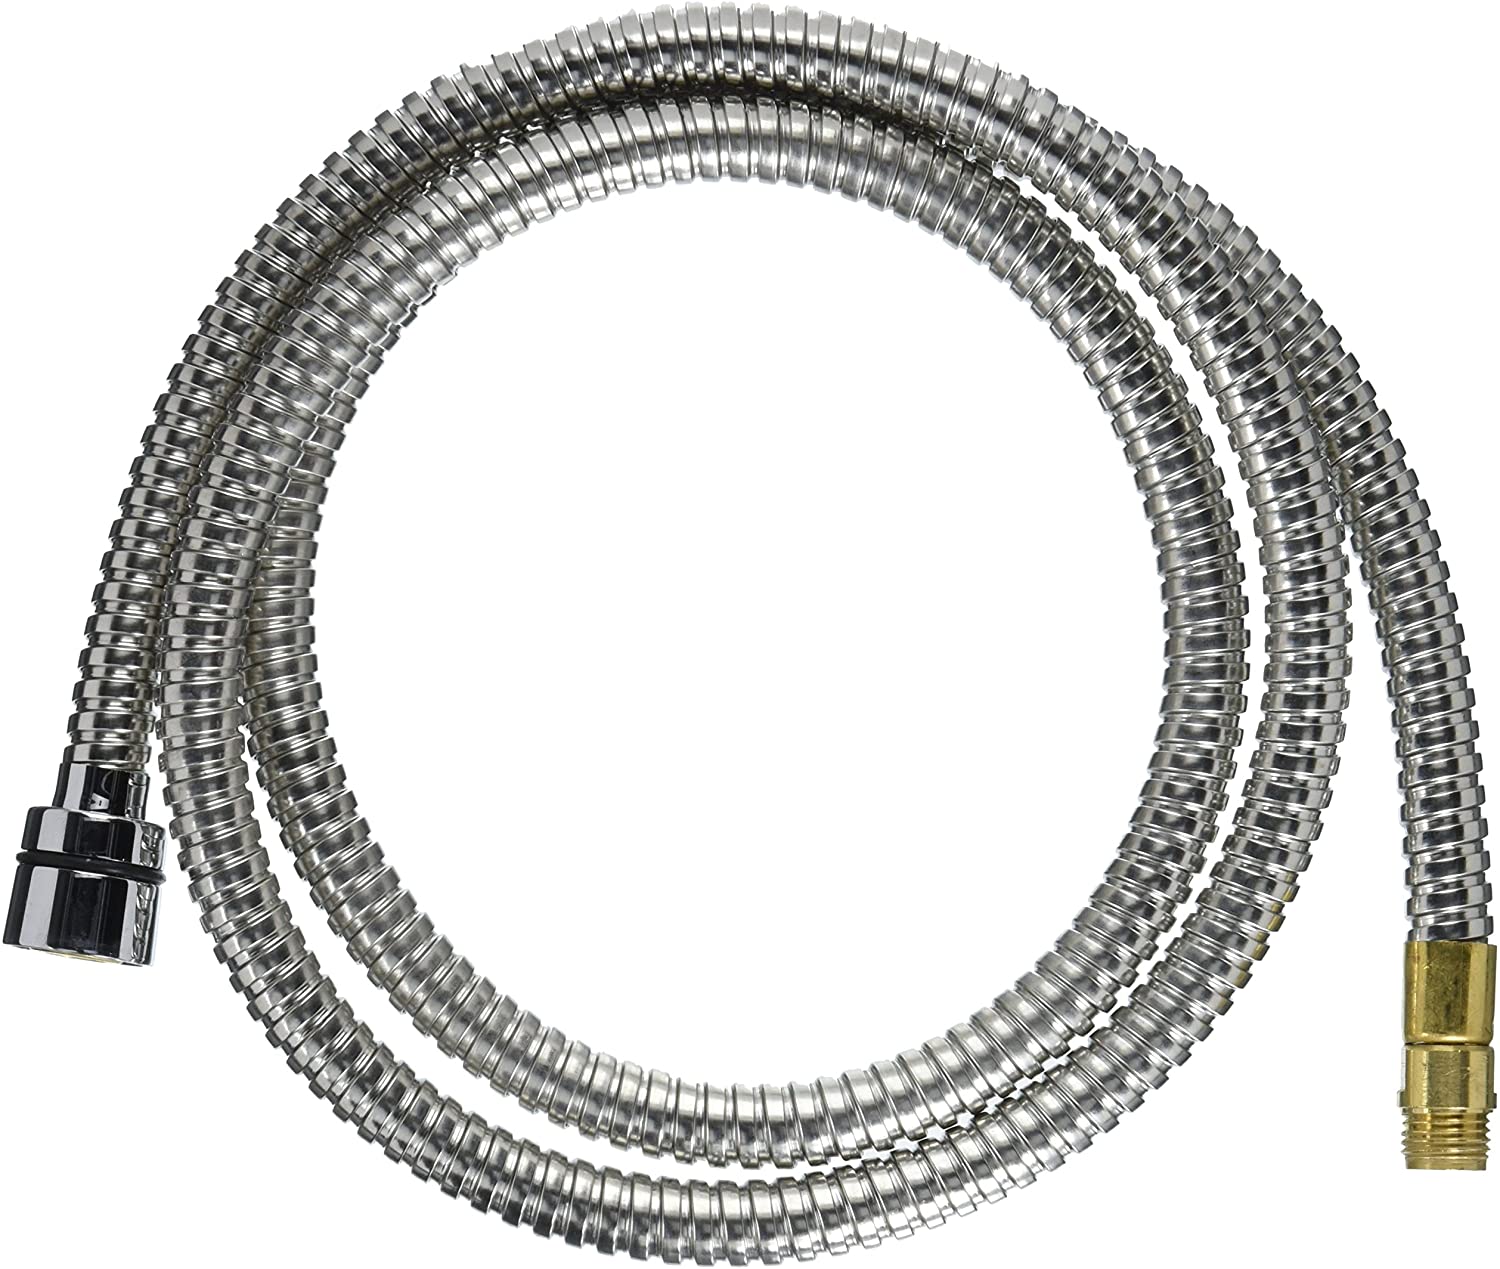 Pfister 951-0450 Pull-Out Spray Hose 